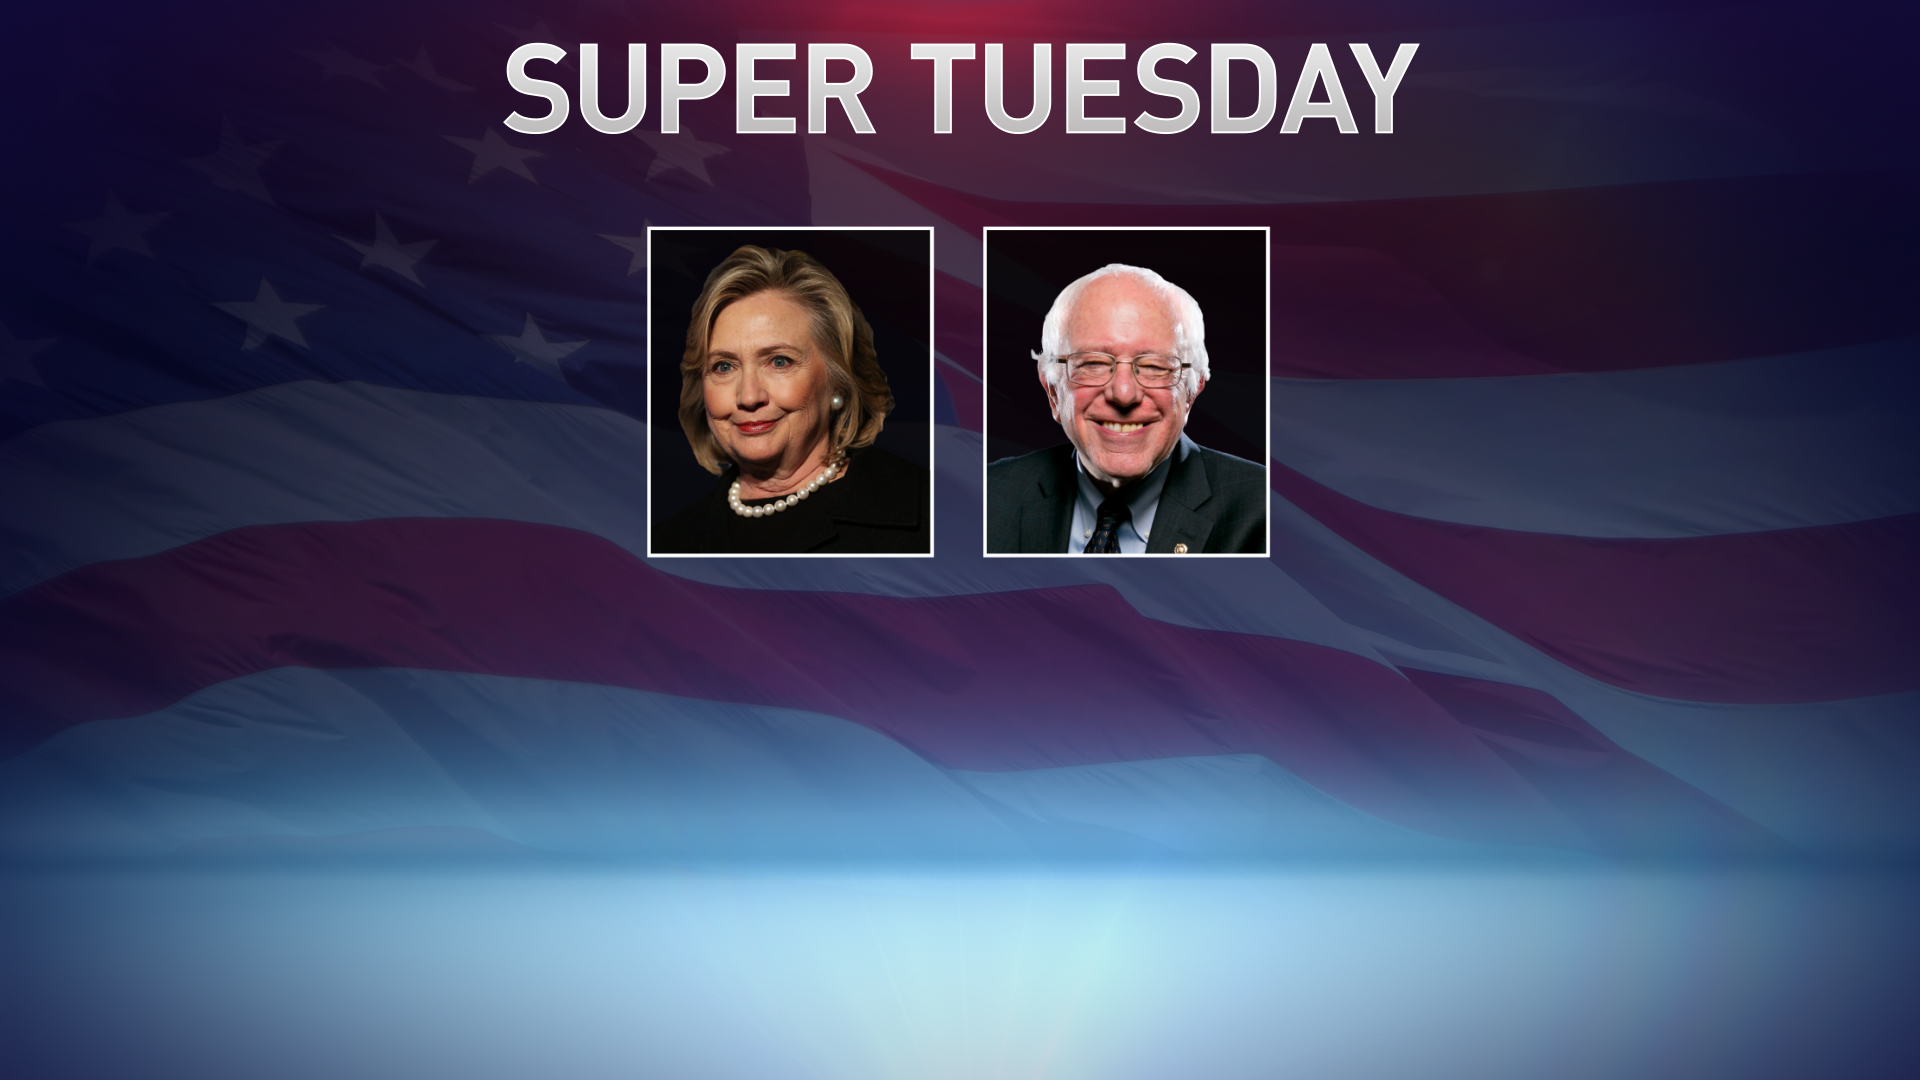 Will Hillary Clinton sweep Sanders on Super Tuesday?